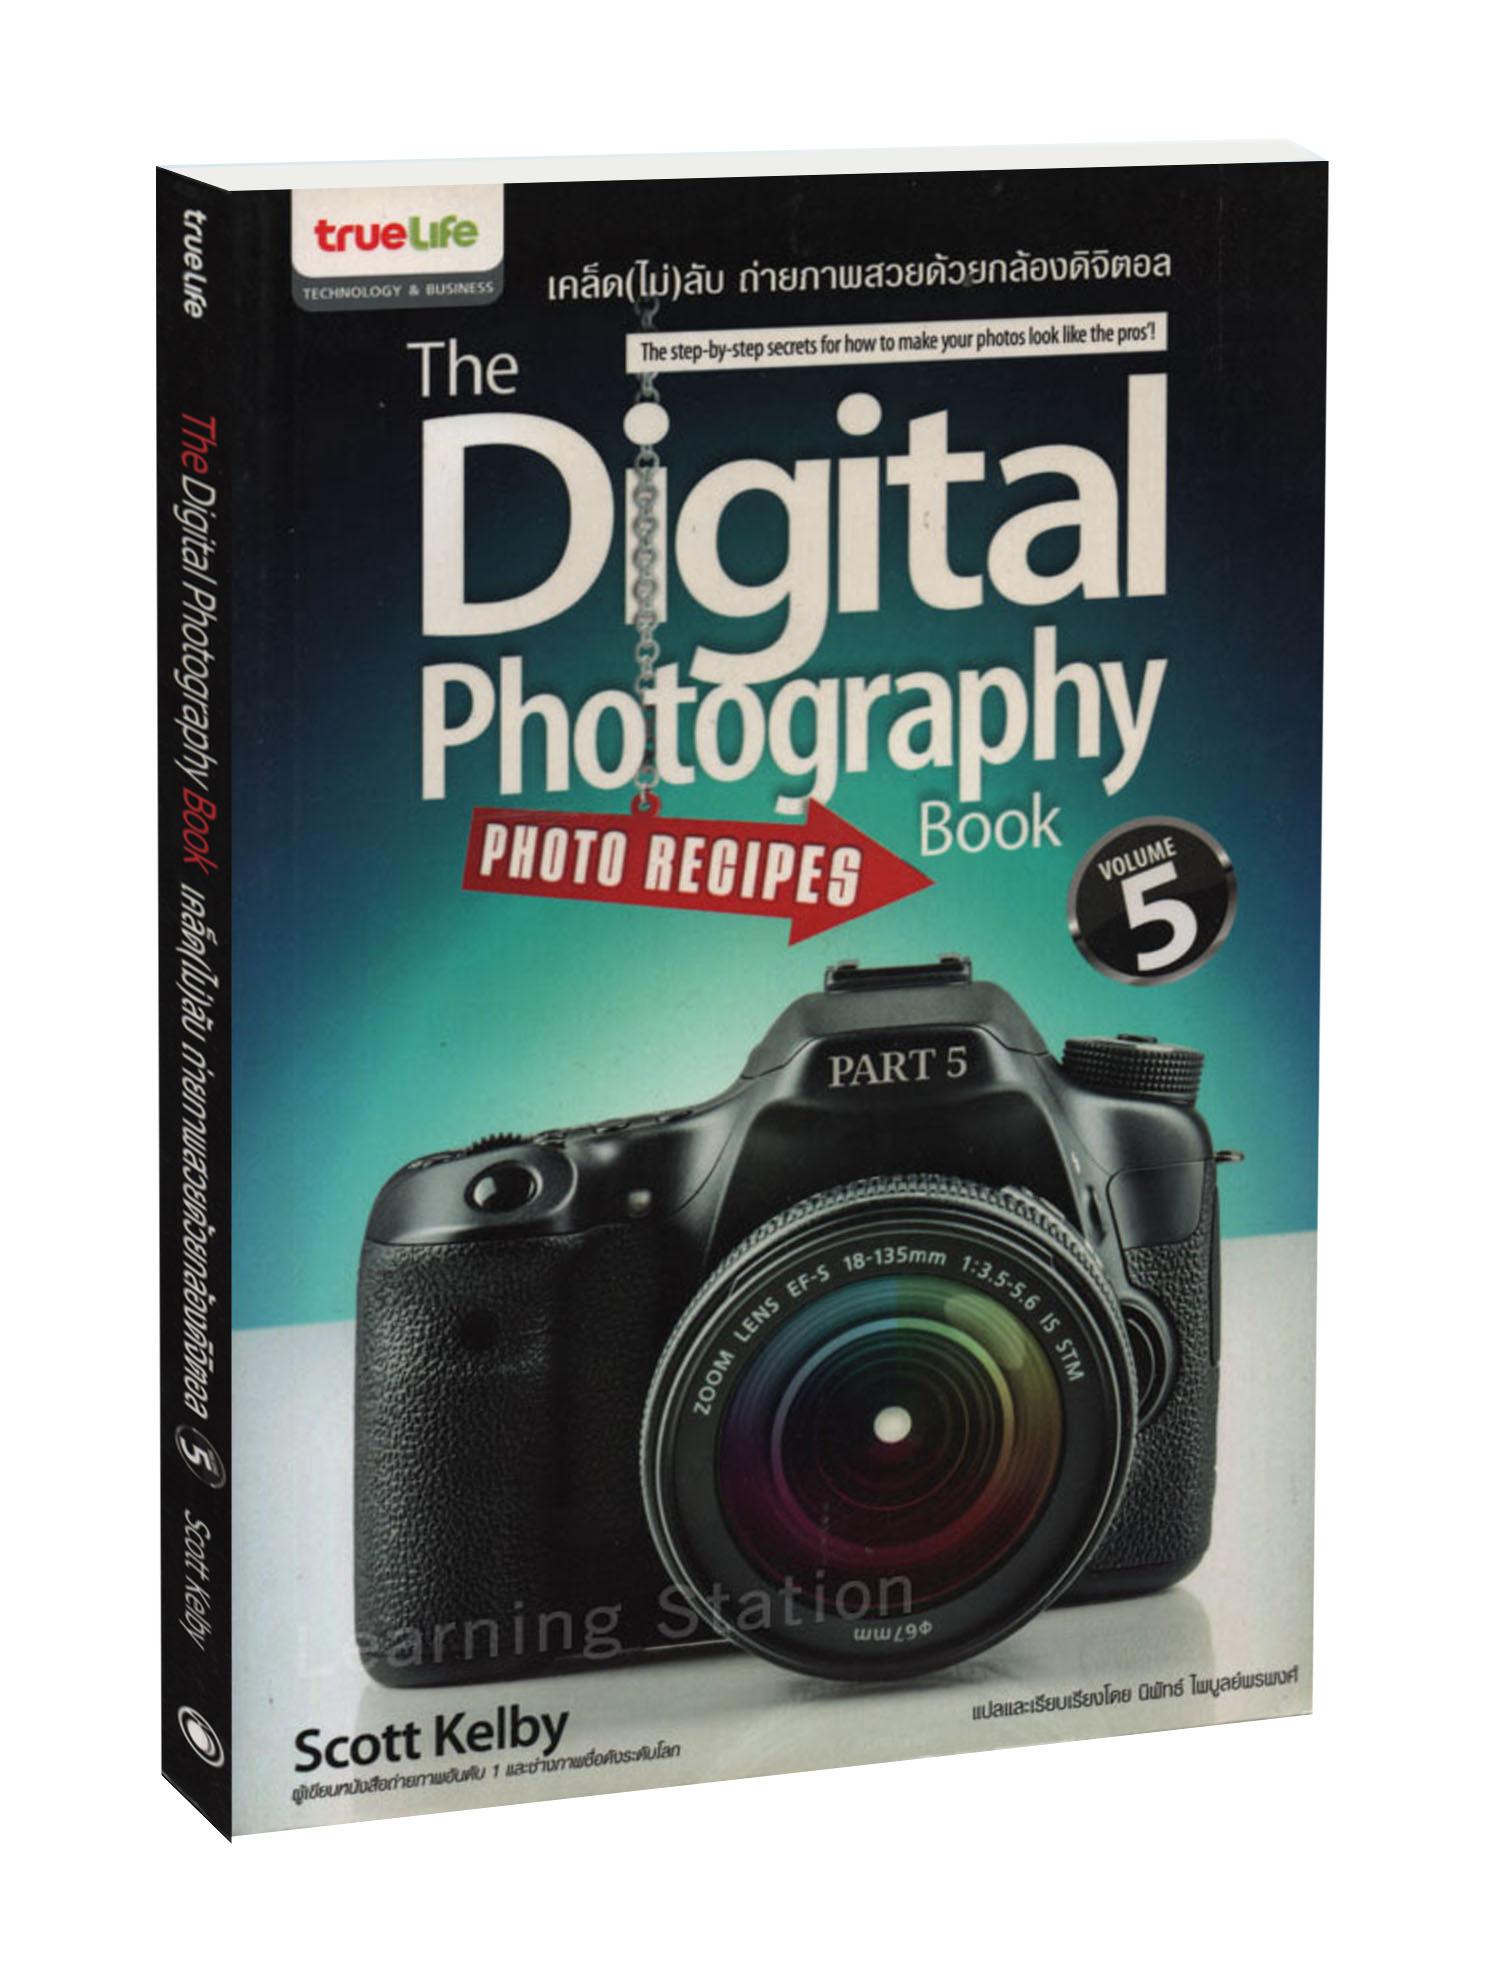 The Digital Photography Book Vol.5